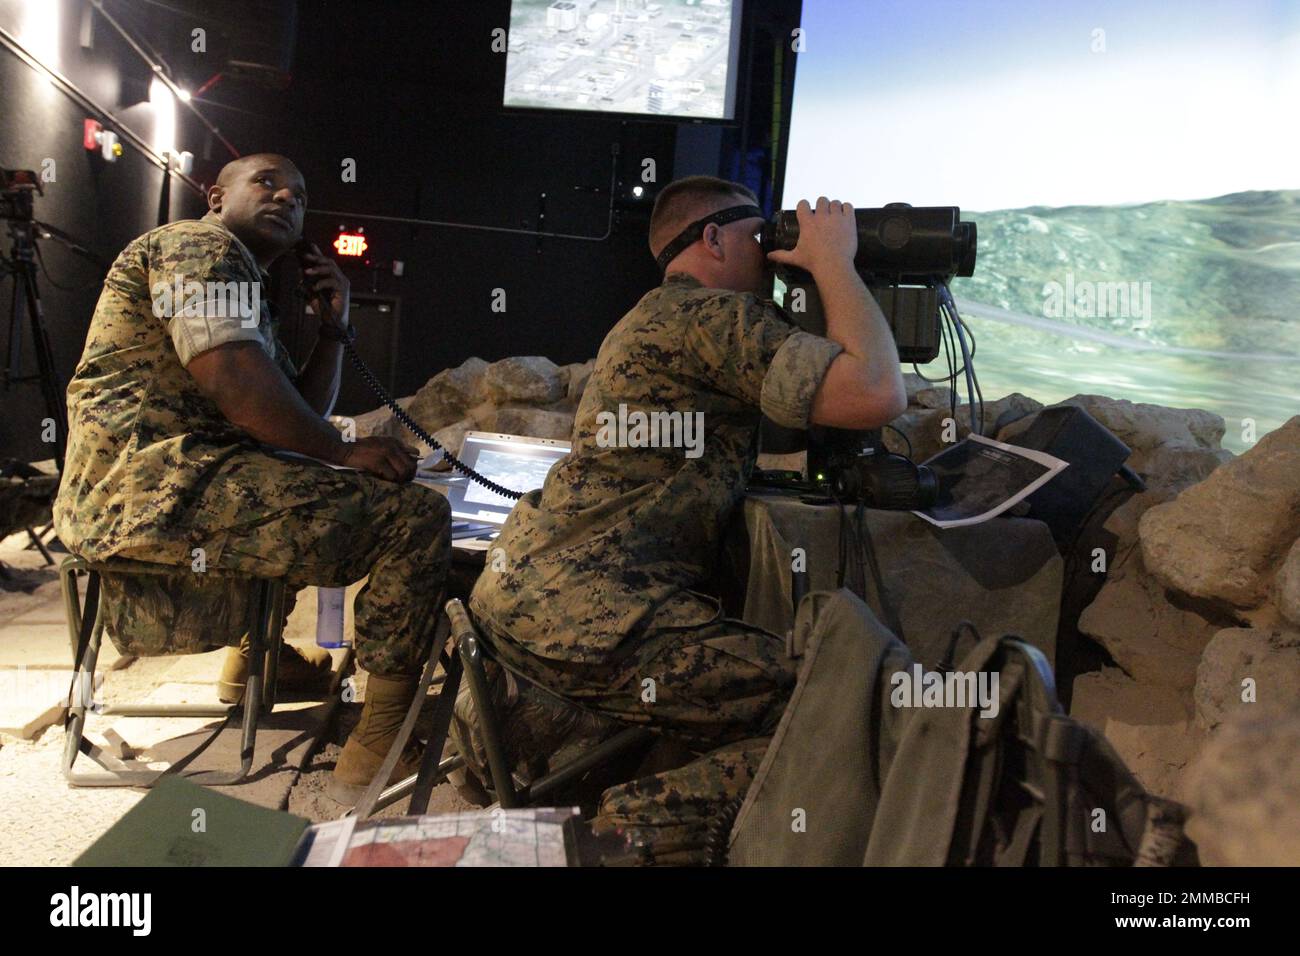 Air Naval Gunfire Liaison Company (ANGLICO) Marine Forces Reservists practice firing exercises in the Simulation Center prior to field exercises. Stock Photo